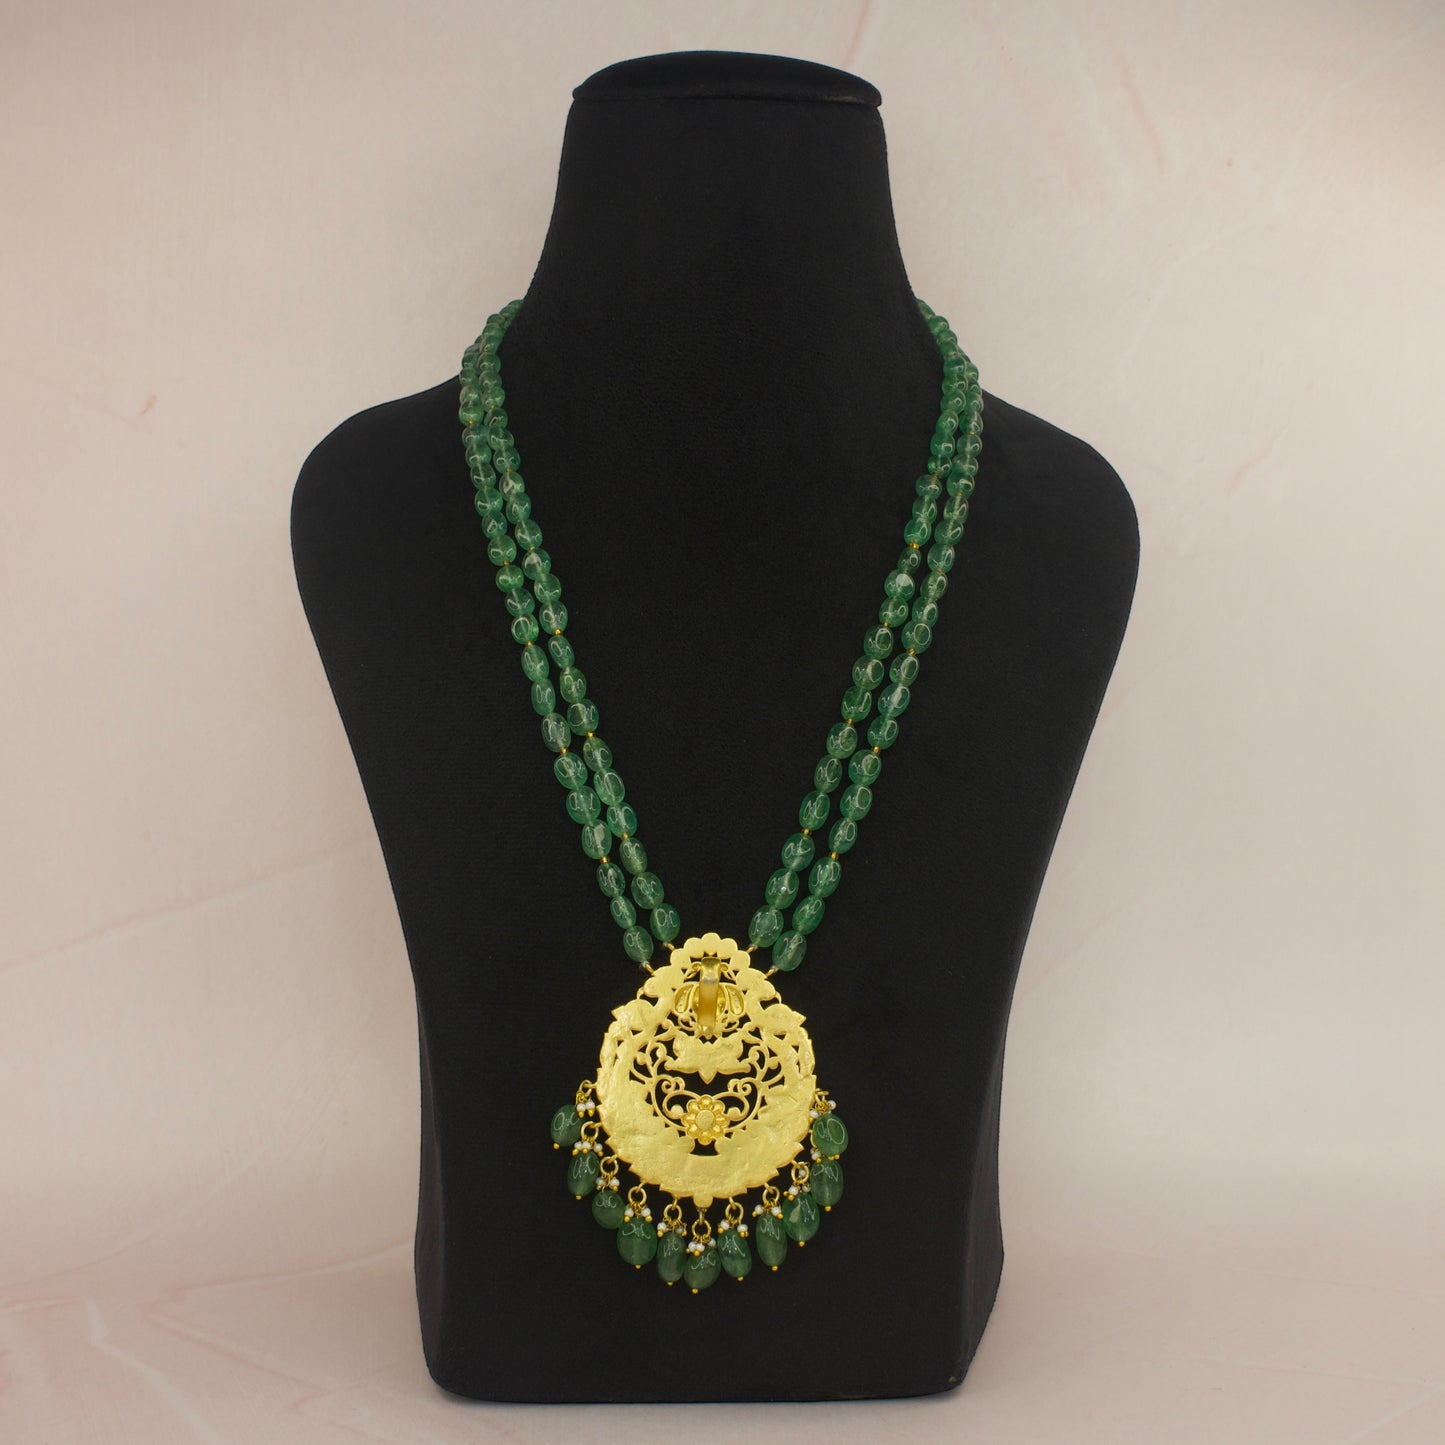 Beads Necklace with Gold Plated Jadau Kundan Pendant with 22k gold plating. This Product belongs to Jadau Kundan jewellery Category